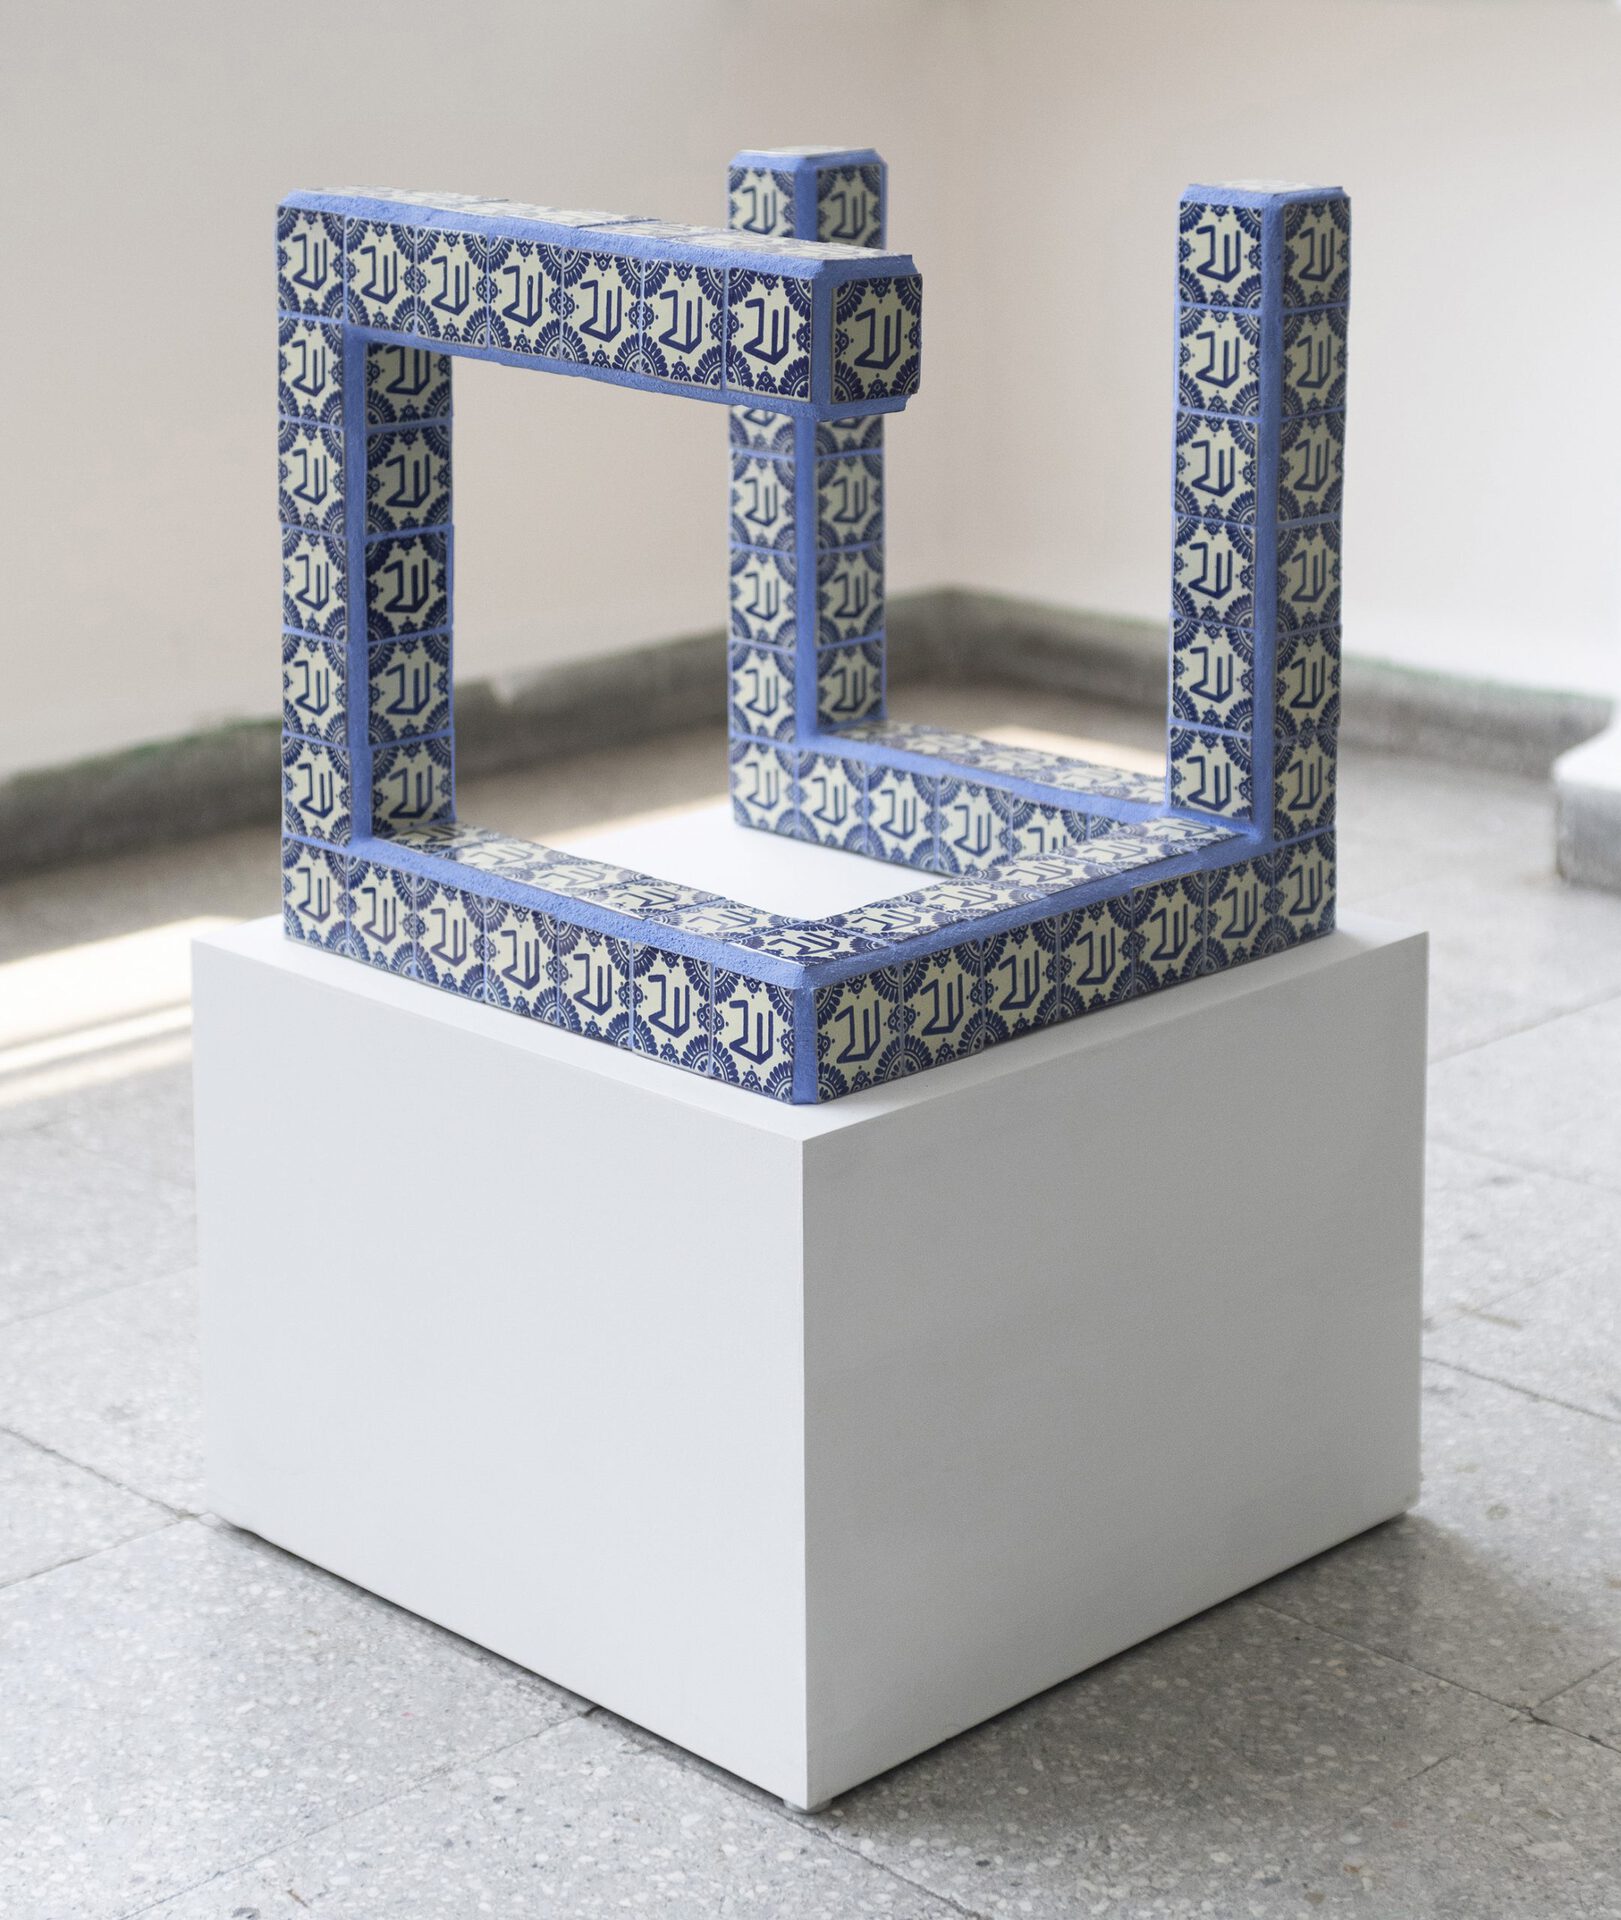 It is immediately evident that a square is a square and a cube is a cube (after Incomplete Open Cube No. 7/14 by Sol LeWitt, 1974) Pinewood, talavera tiles, tile joint filer 37 x 37 x 37 cm (14